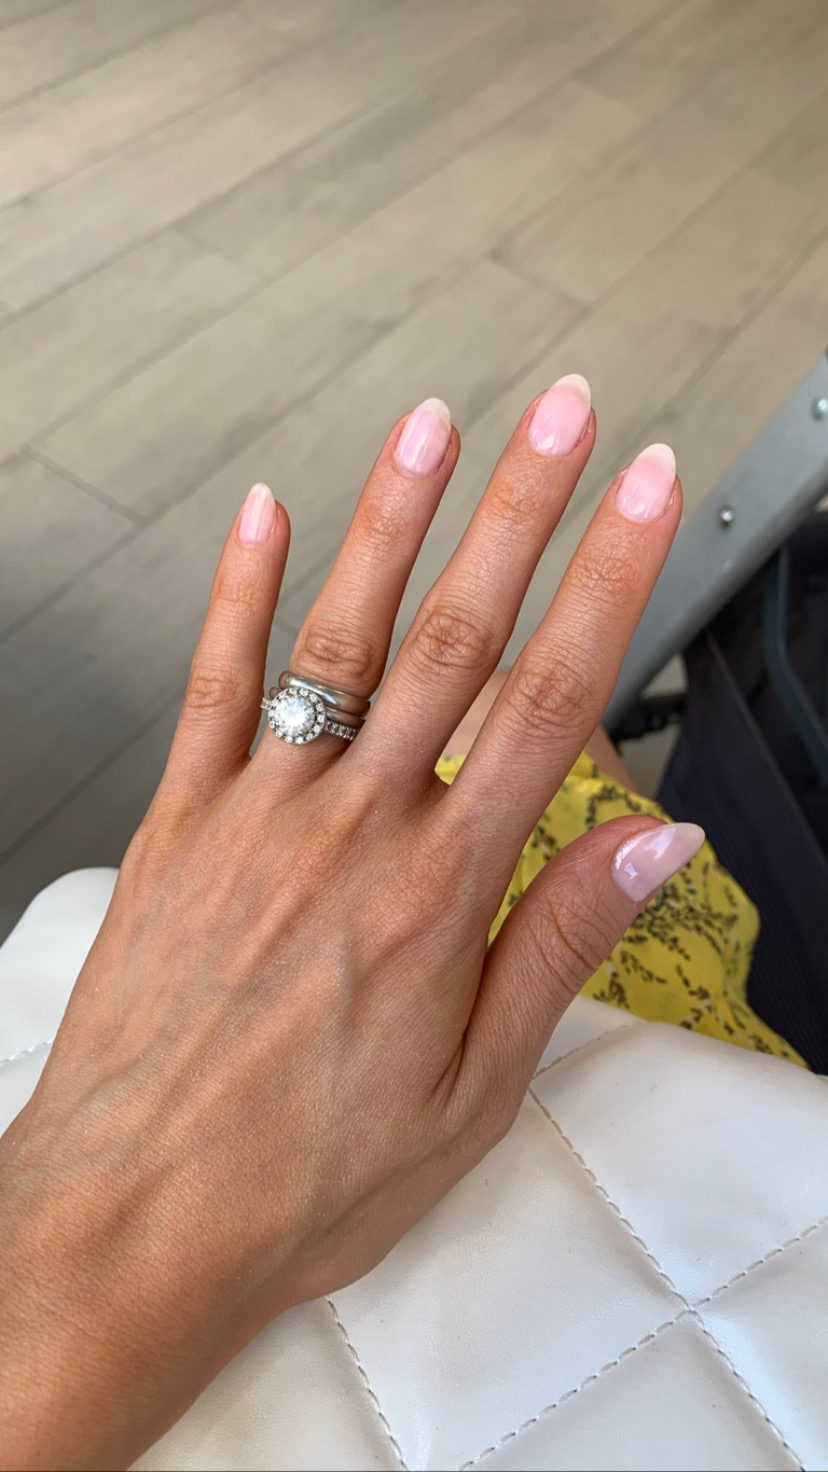 Tips on How to Grow Long, Healthy Nails | by Debrarsaxton | Medium